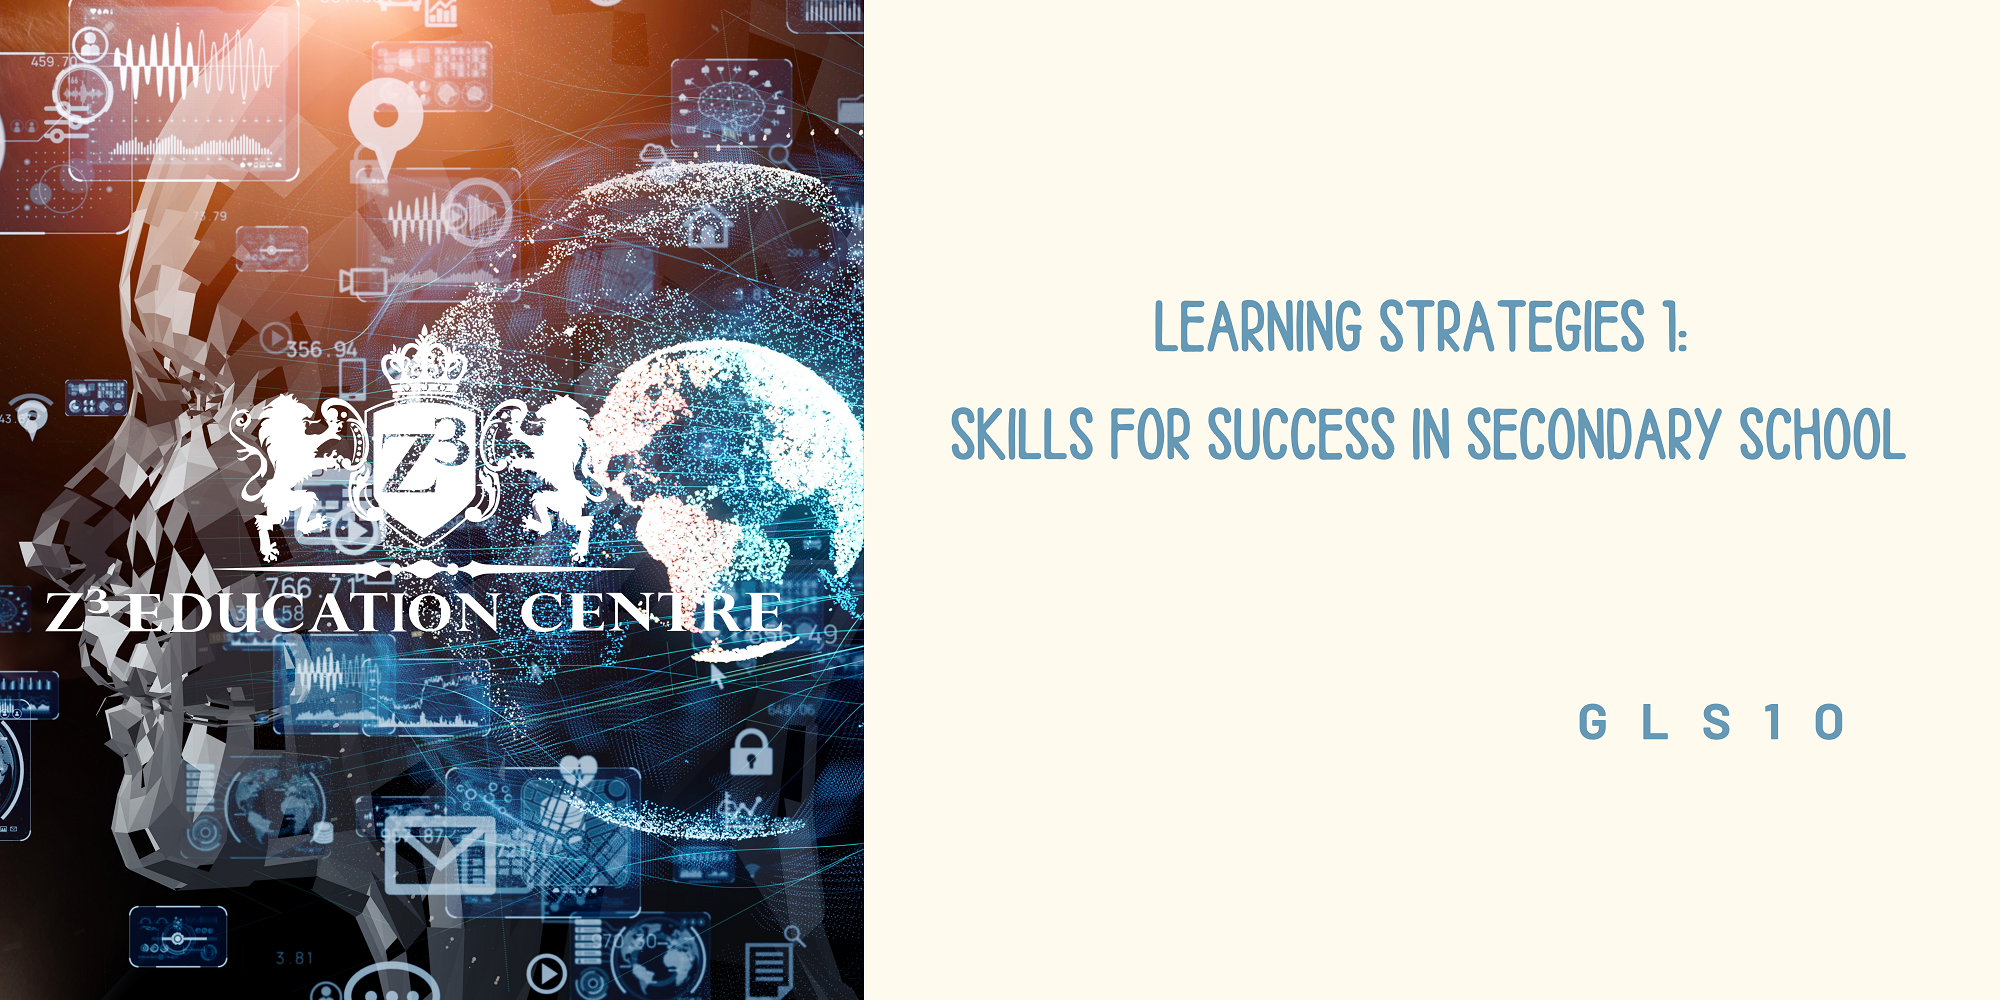 Learning Strategies 1: Skills for Success in Secondary School